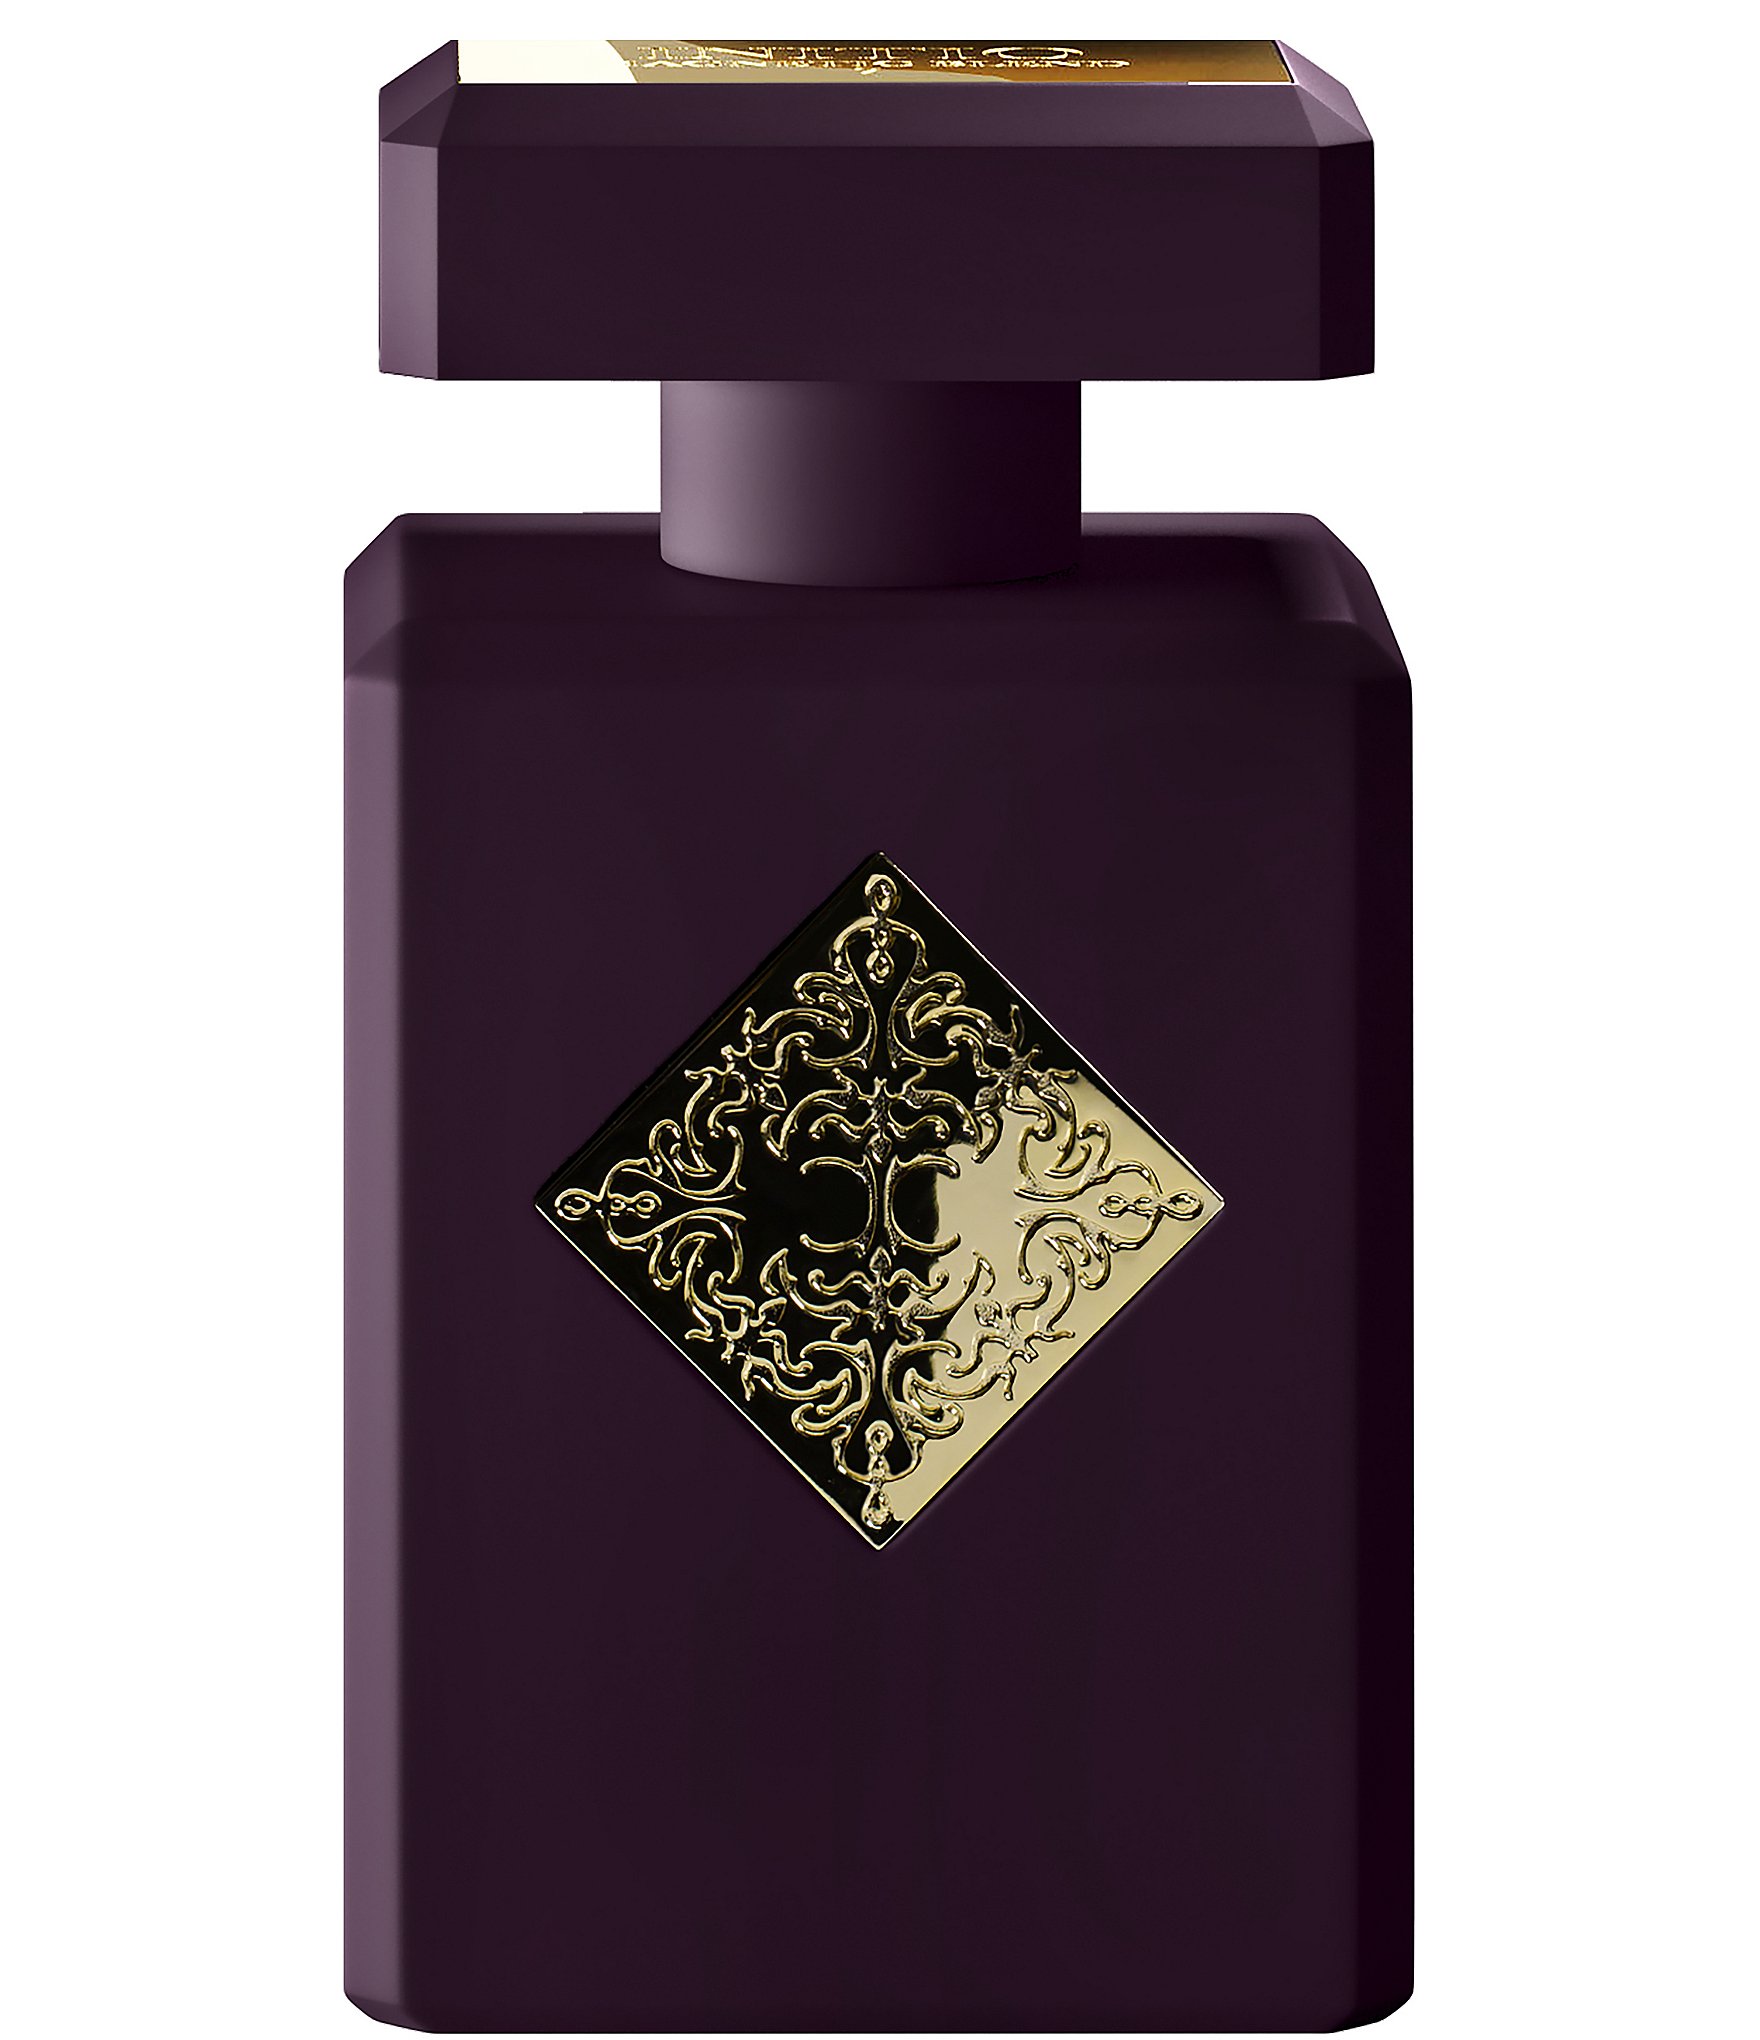 Prives side effect. Atomic Rose Initio Parfums. Initio Parfums prives Side Effect EDP 90ml. Atomic Rose Initio Parfums prives. Side Effect Initio Parfums prives.